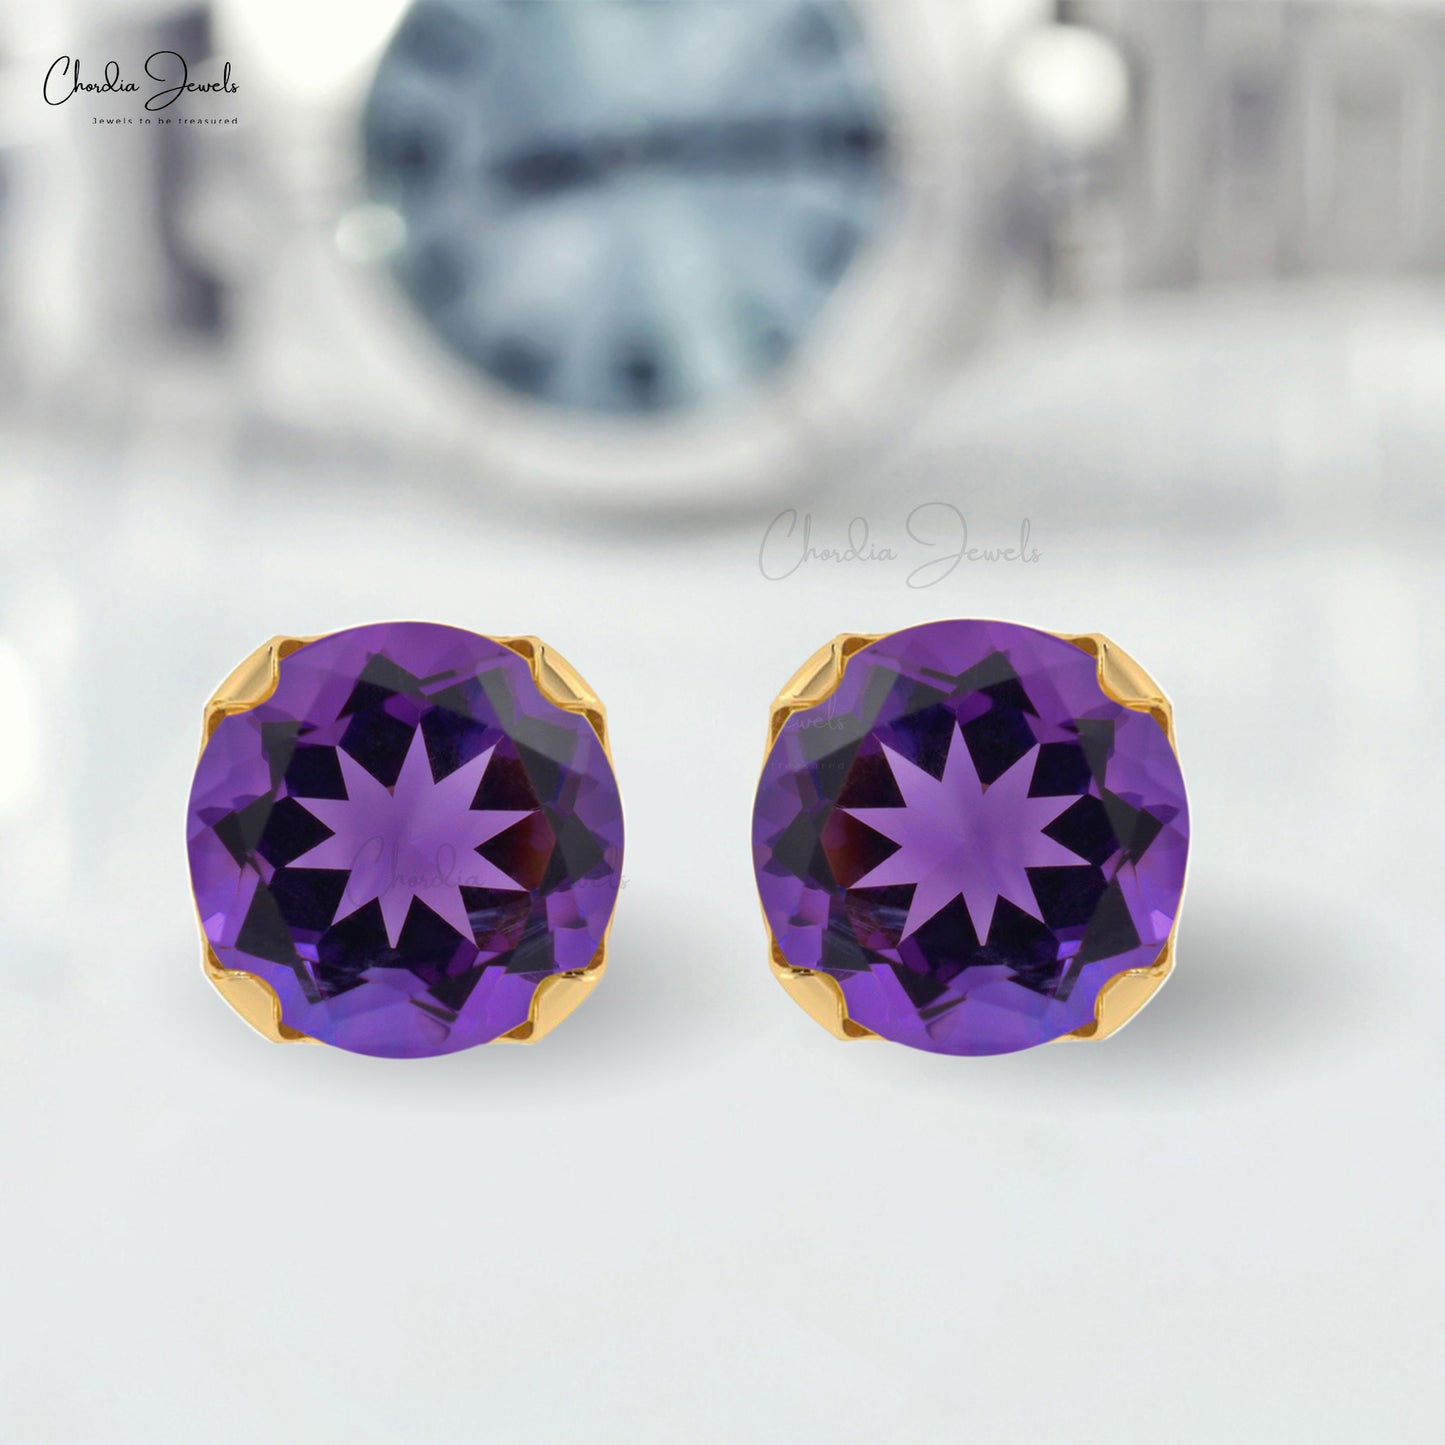 Authentic AAA Amethyst 0.44 Ct Gemstone Stud Earrings, 4mm Round Brilliant Cut Studs For Birthday Gift, 14k Solid Gold Purple Earrings Minimalist Jewelry For Women